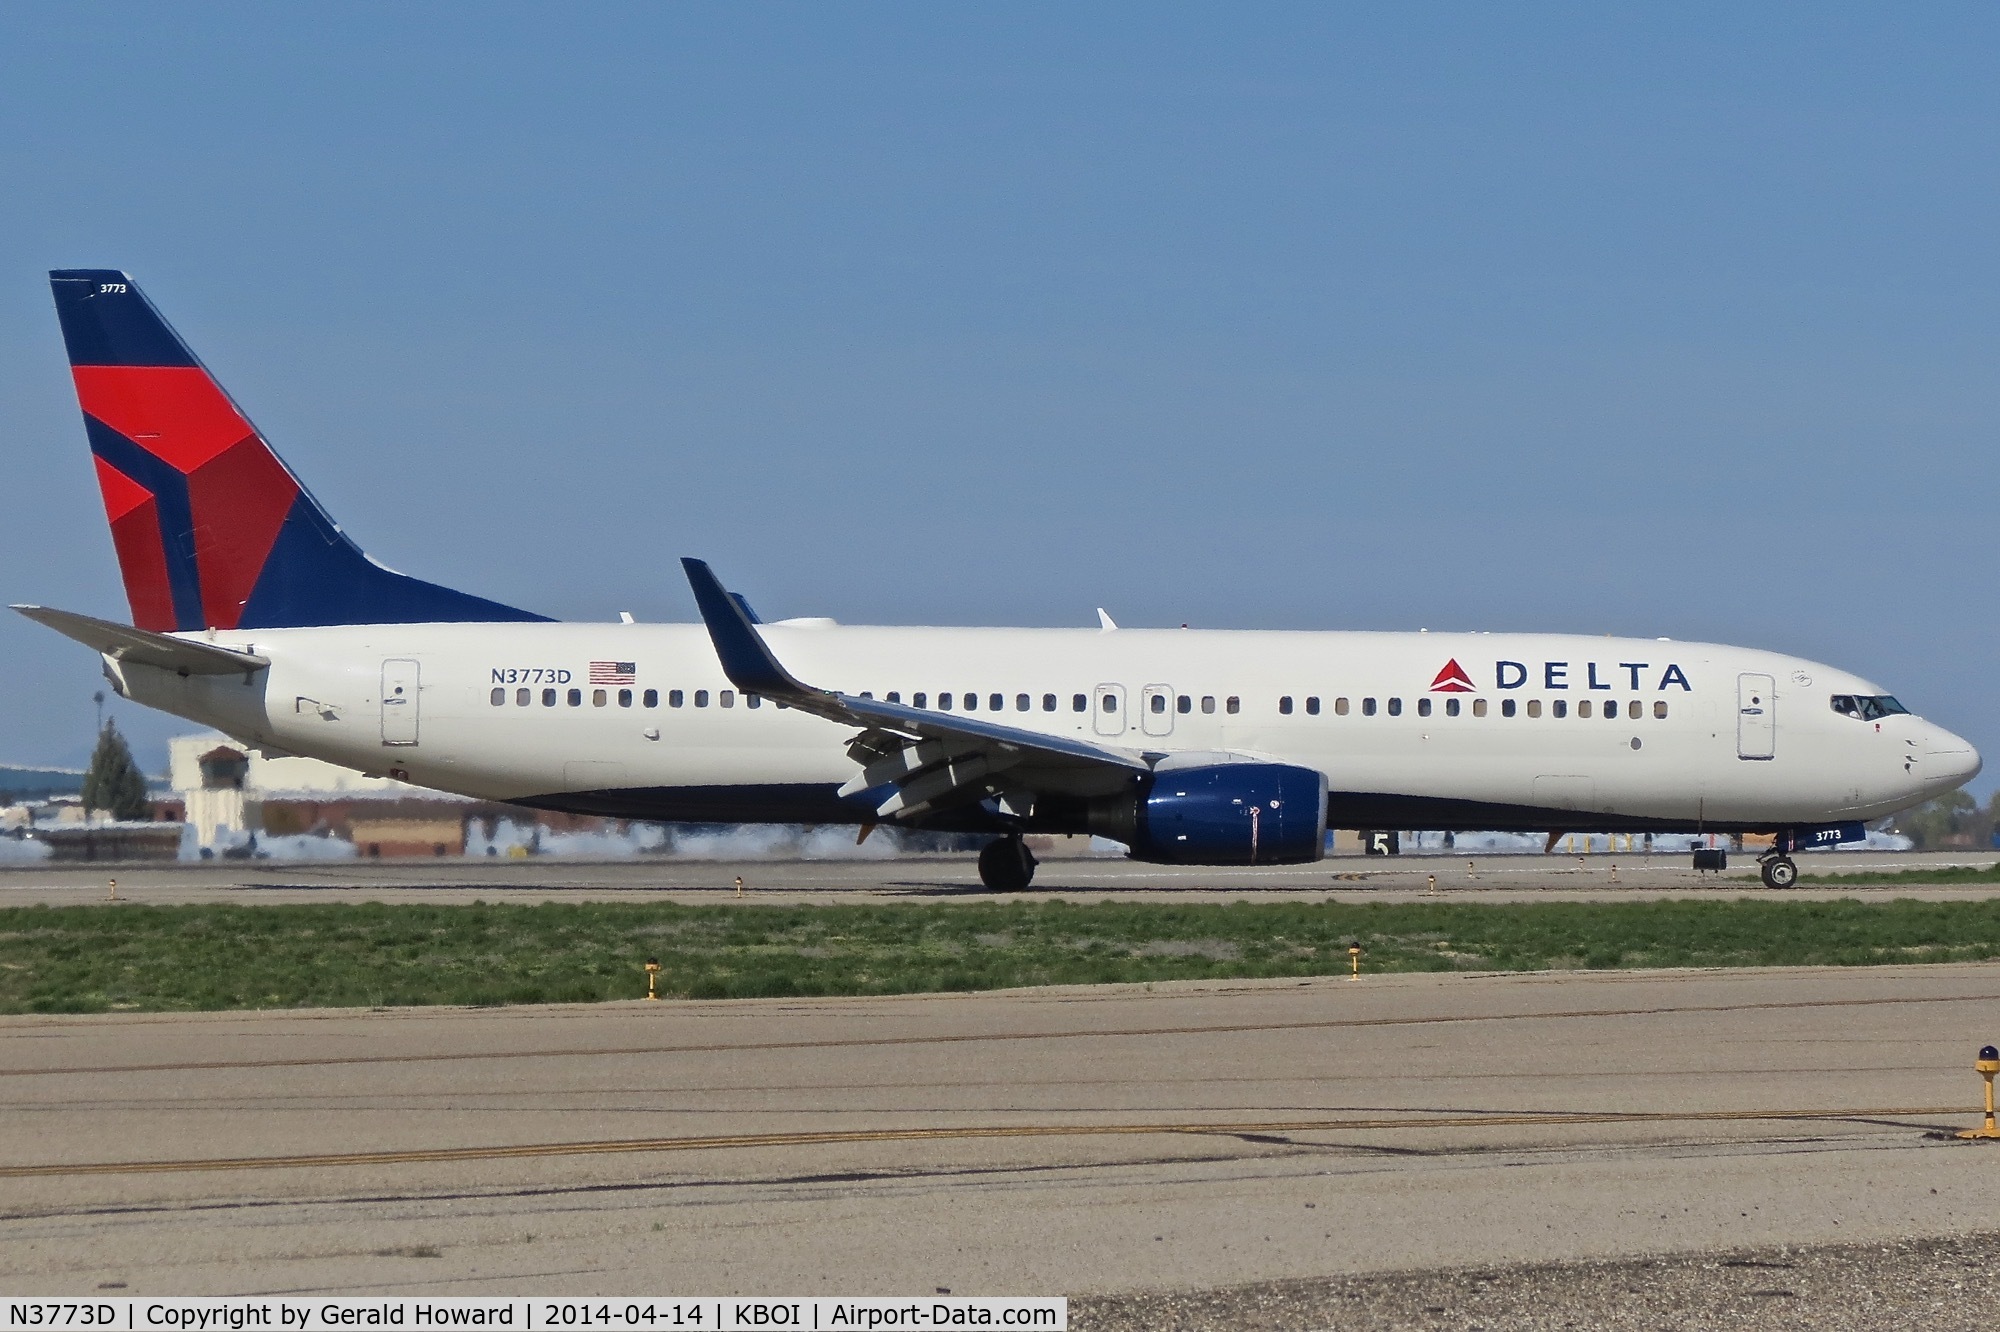 N3773D, 2010 Boeing 737-832 C/N 30825, Taxiing on Delta to the ramp.